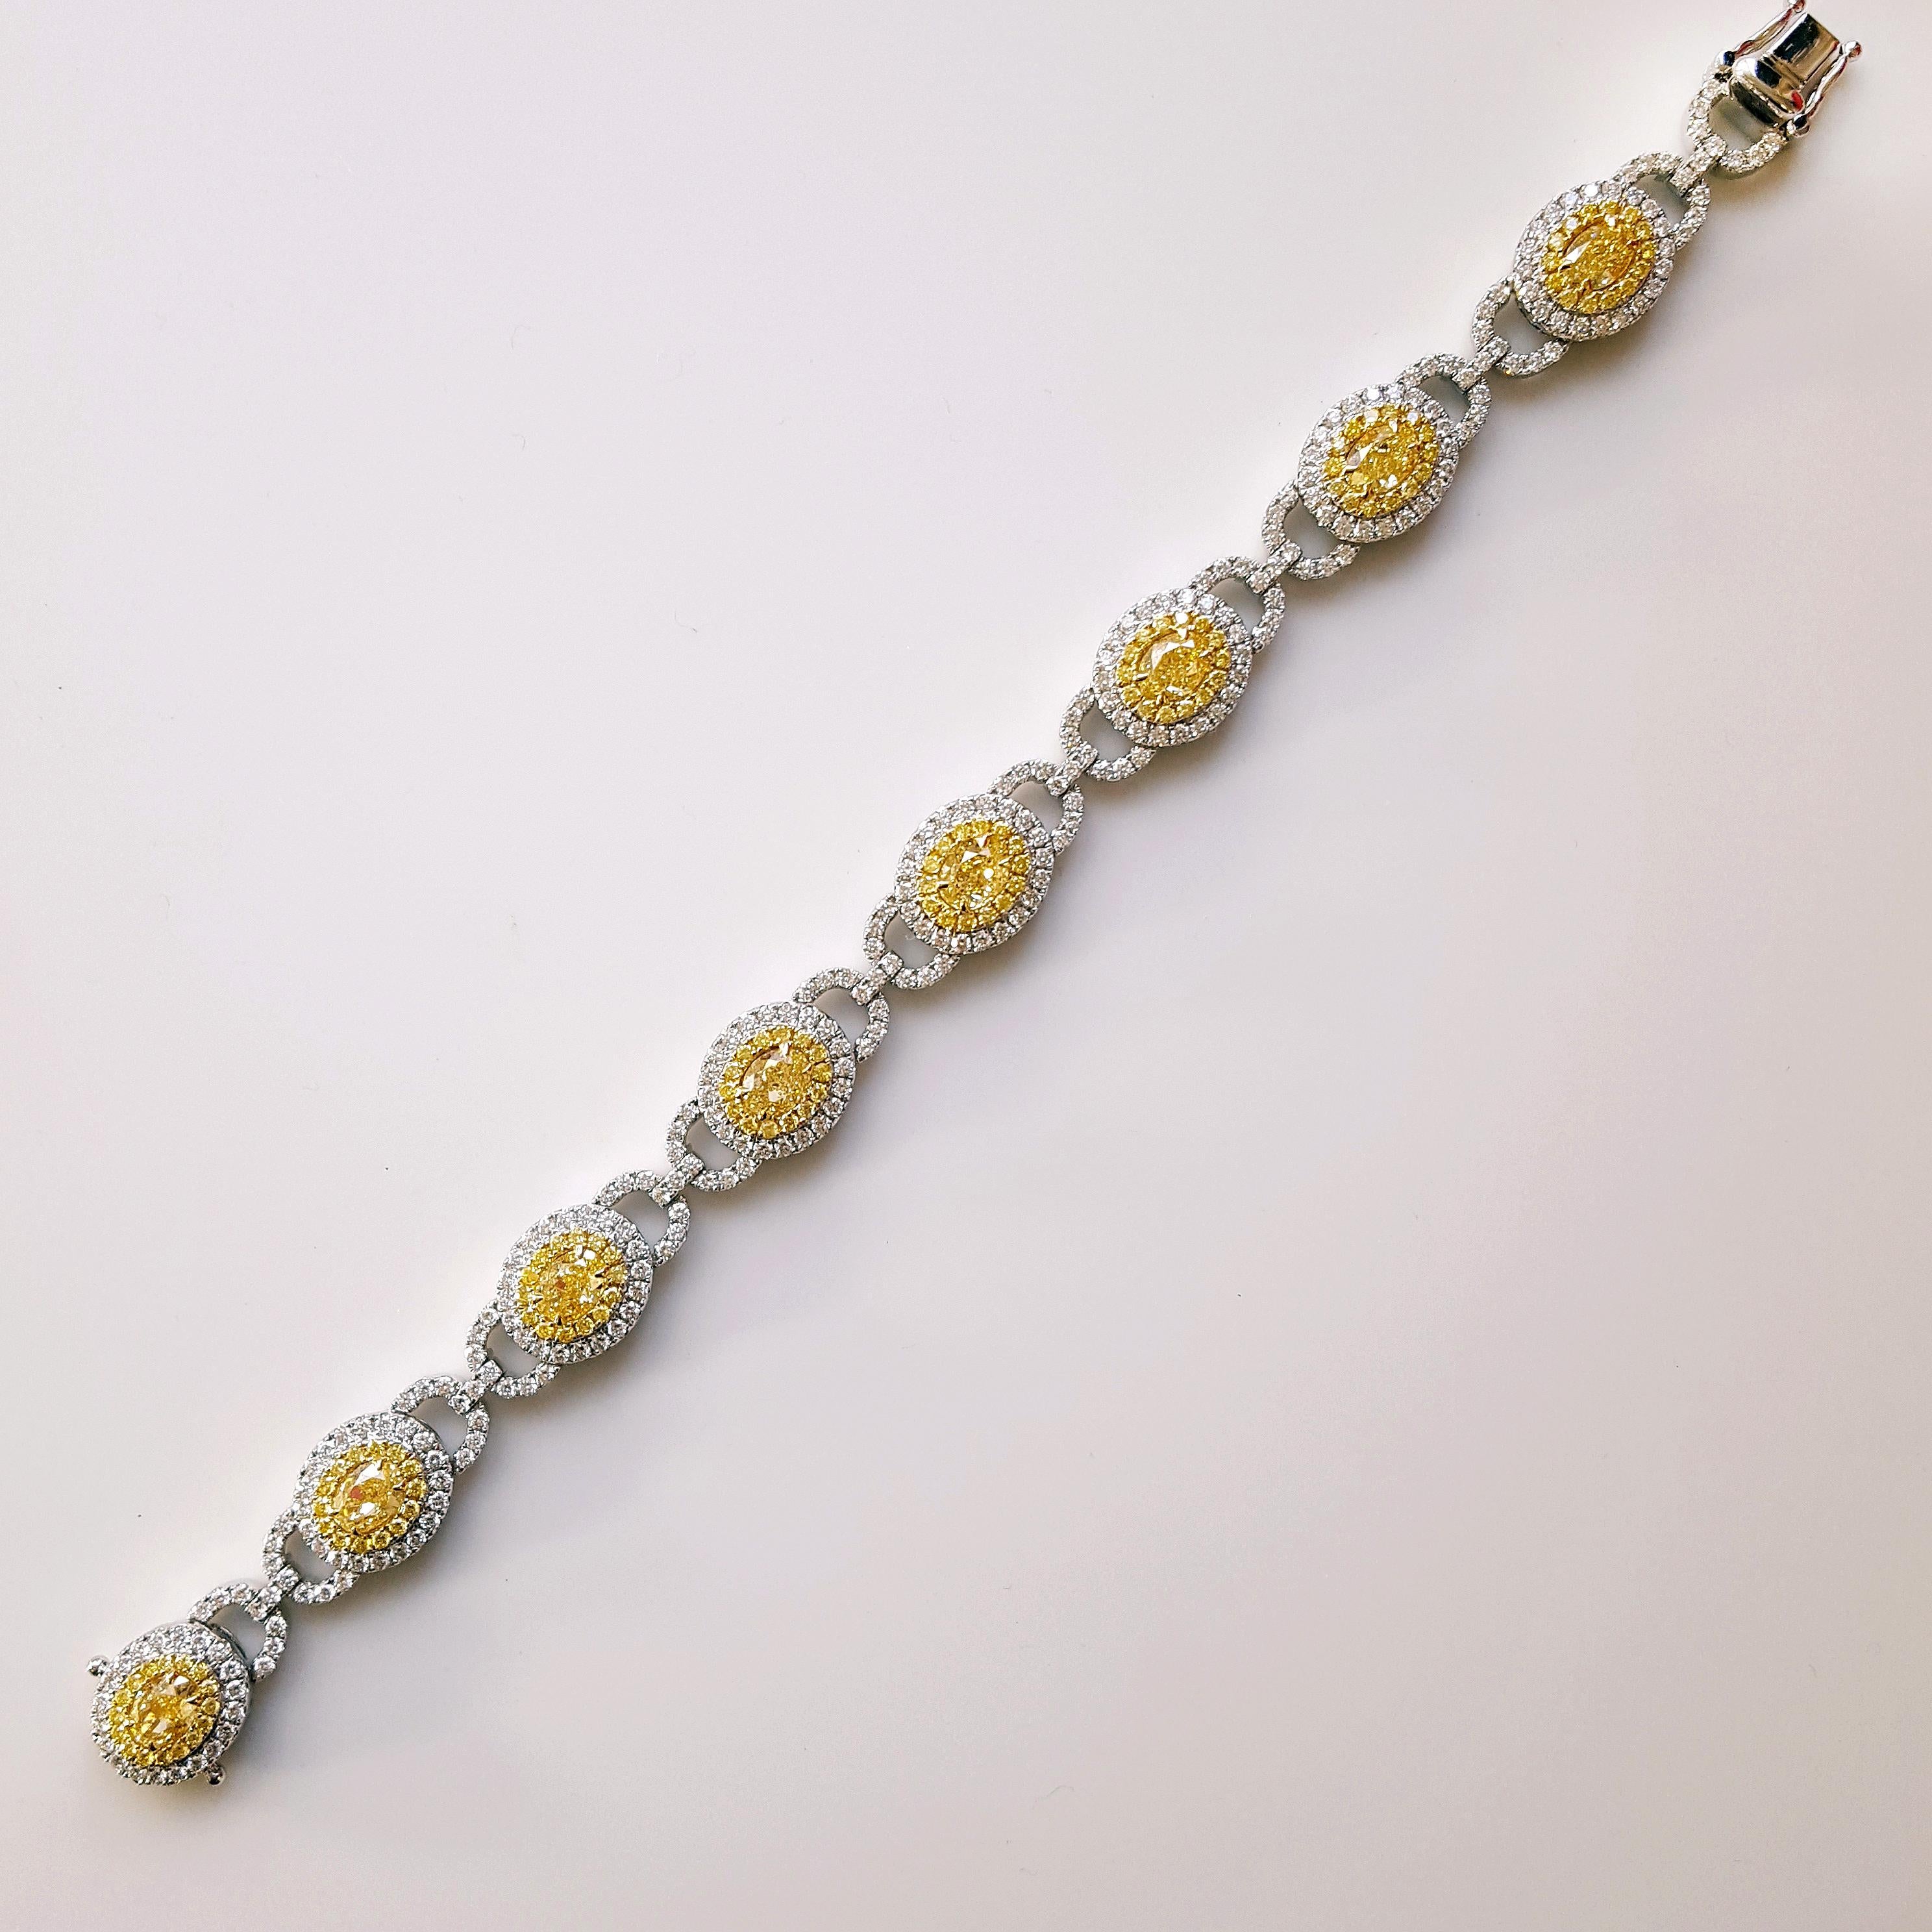 A truly remarkable statement bracelet featuring a dazzling array of 5.89 carats of Oval-Cut yellow diamonds at its heart. Each of these exquisite yellow diamonds is cradled within 18K yellow gold and 18K white gold frames, adorned with a halo of 114